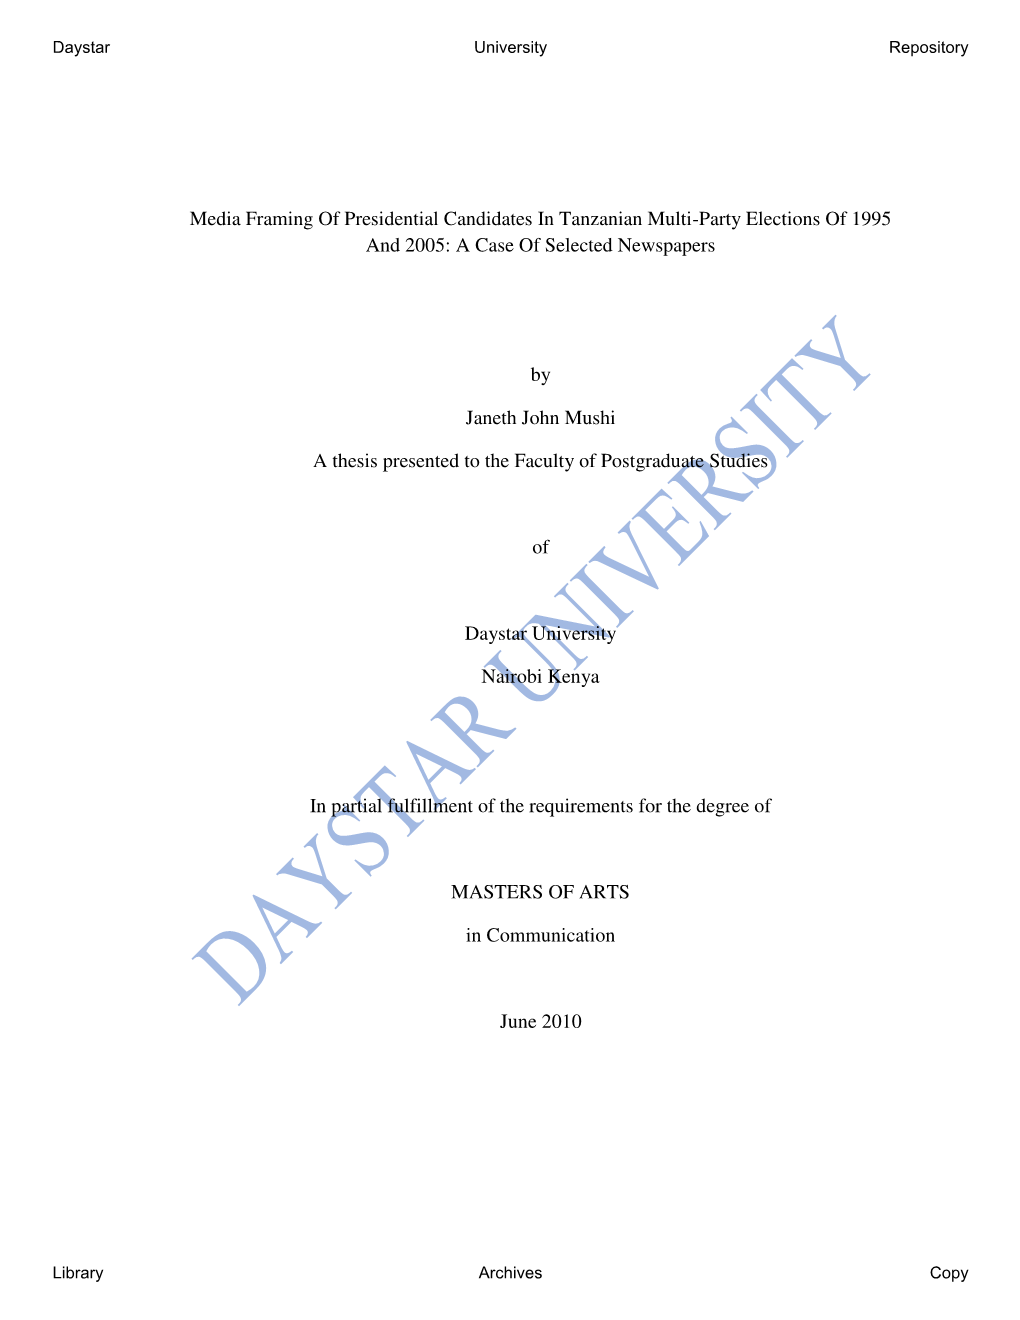 Media Framing of Presidential Candidates in Tanzanian Multi-Party Elections of 1995 and 2005: a Case of Selected Newspapers